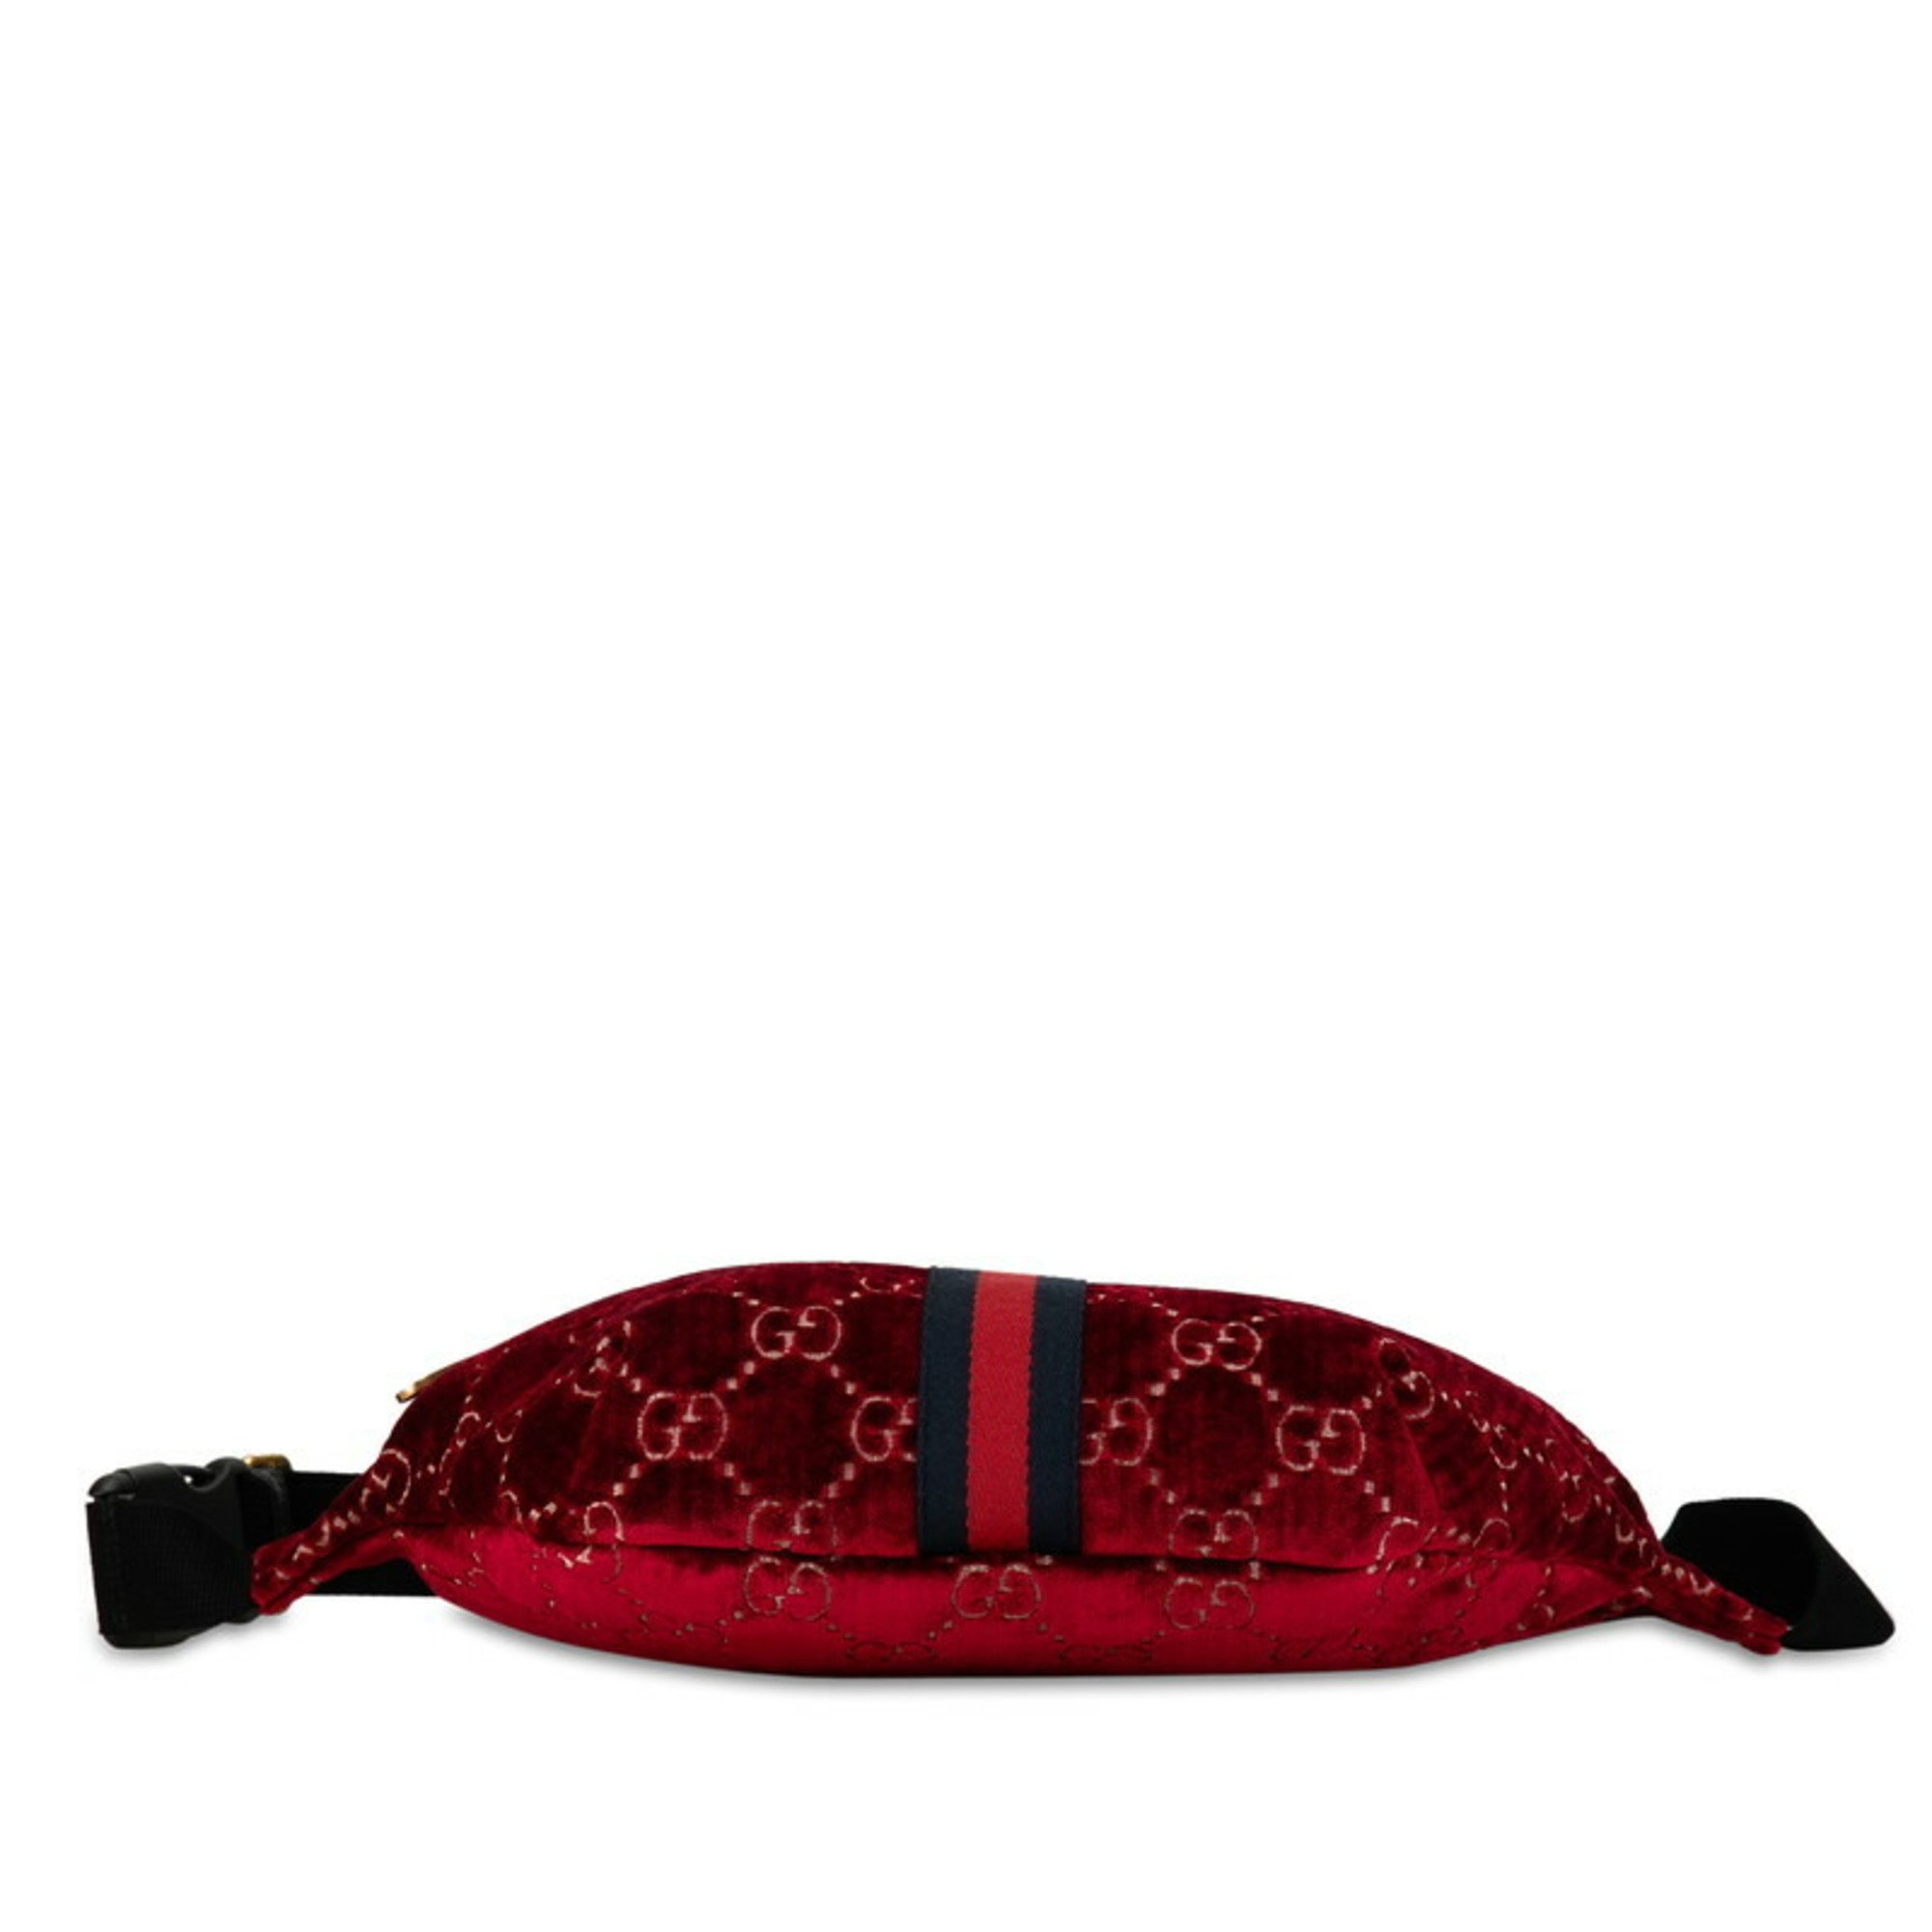 Gucci GG Velvet Sherry Line Waist Bag Body 574968 Red Leather Women's GUCCI